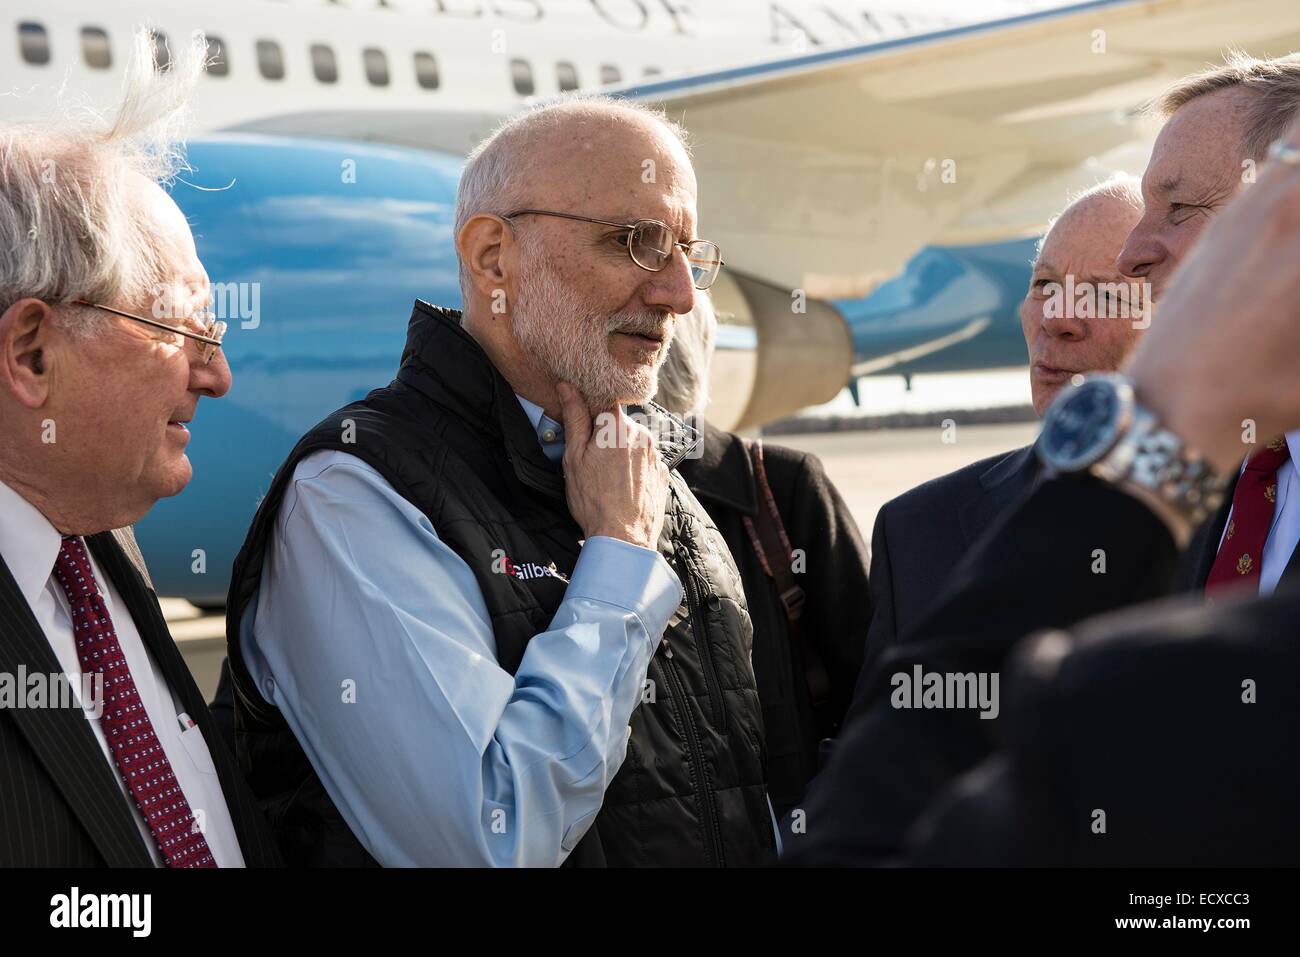 USAID contractor Alan Gross, imprisoned in Cuba for five years, is greeted by a group of Senators after a flight back from Cuba following his release December 17, 2014 at Andrews Air Force Base in Maryland. Stock Photo